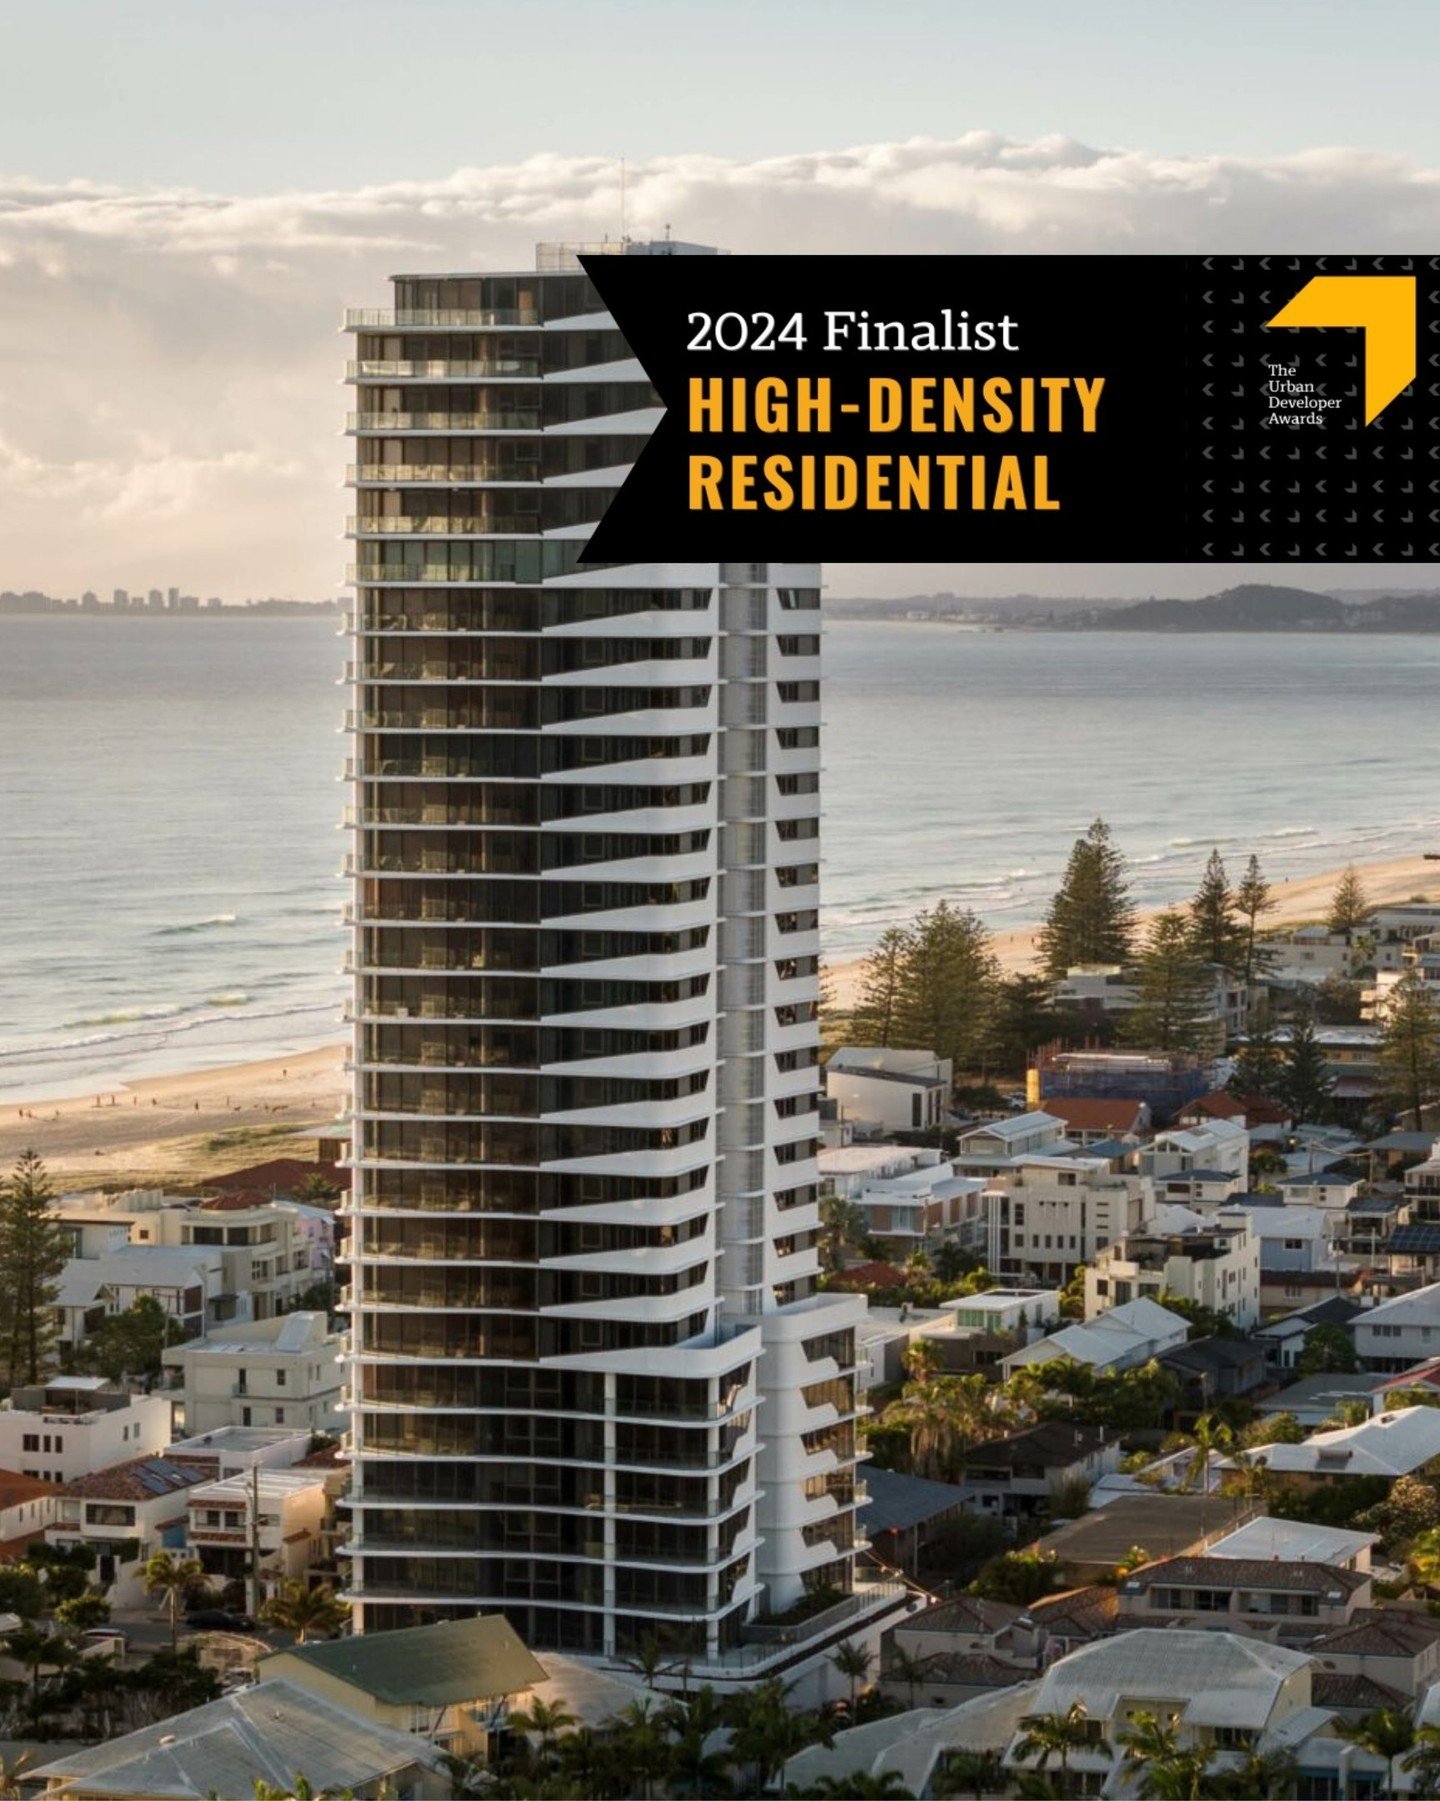 FINALISTS ⁠&bull; The Urban Developer Awards⁠
⁠
We're pleased to announce that Dawn, R.Iconic and Lidcombe Rise are finalists across 4 categories in the 7th edition of The Urban Developer Awards!⁠
⁠
From Dawn's coastal-inspired elegant form to R.Icon